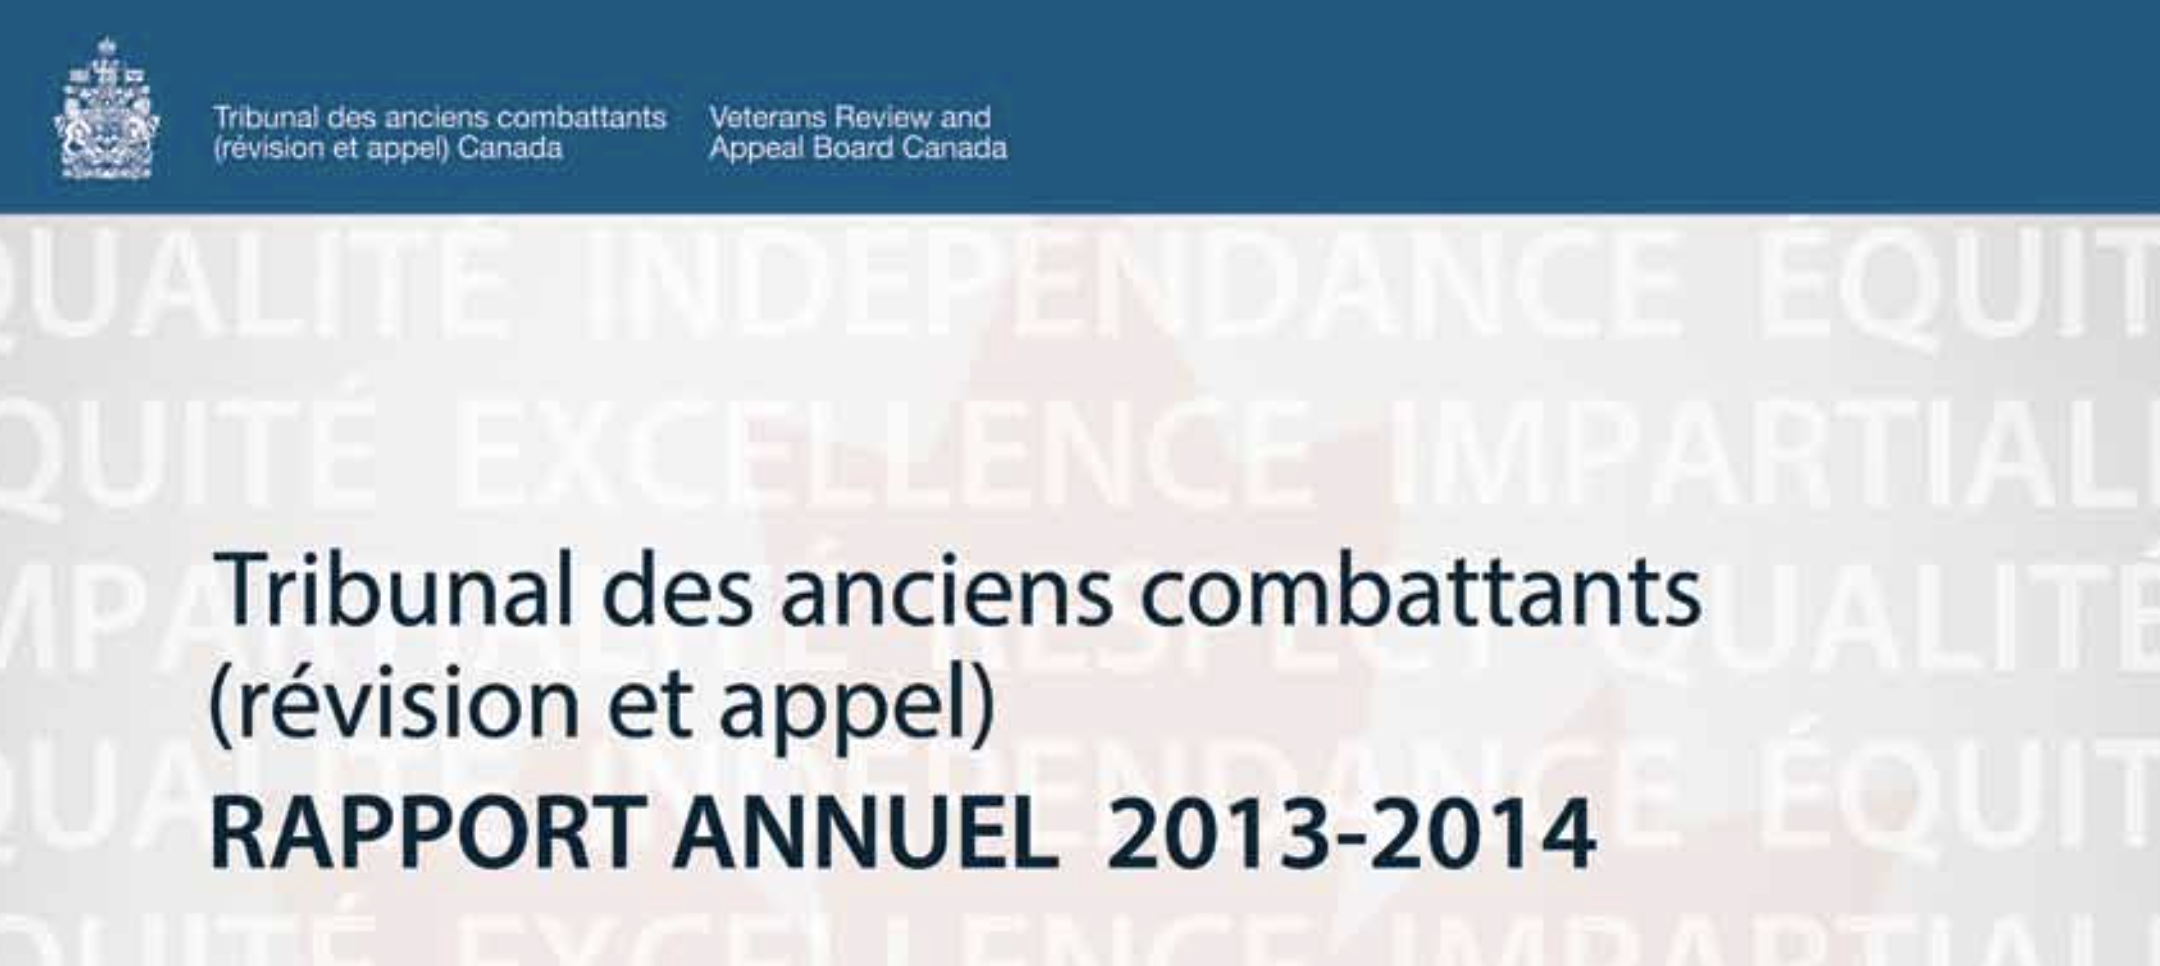 2013-2014 Rapport annuel